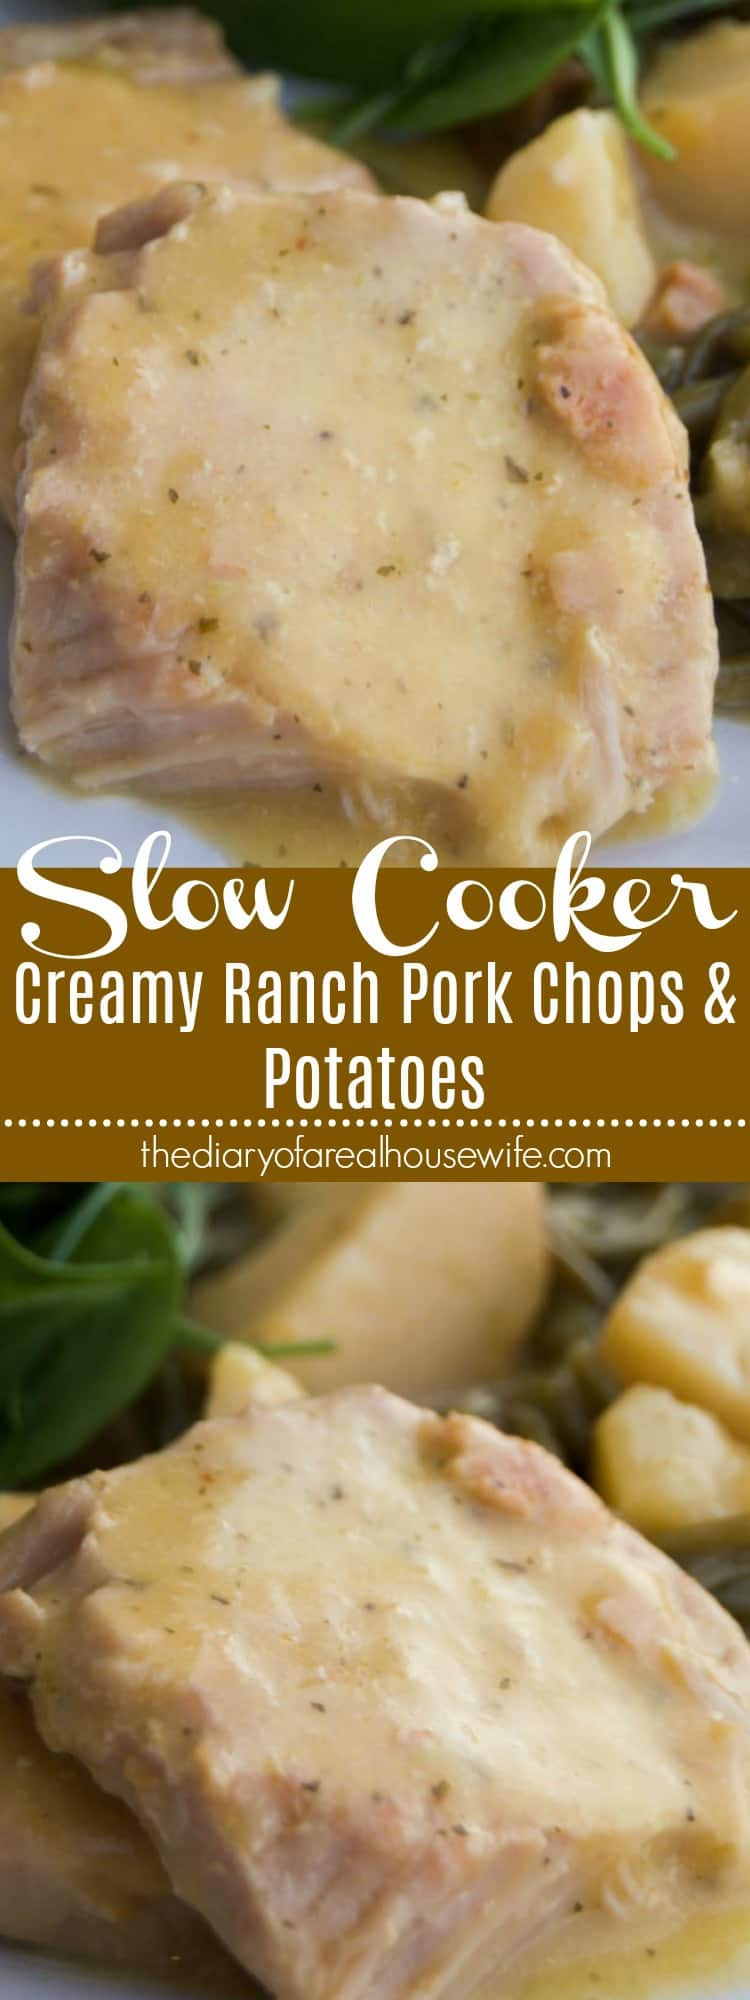 Slow Cooker Ranch Pork Chops
 Slow Cooker Creamy Ranch Pork Chops and Potatoes The